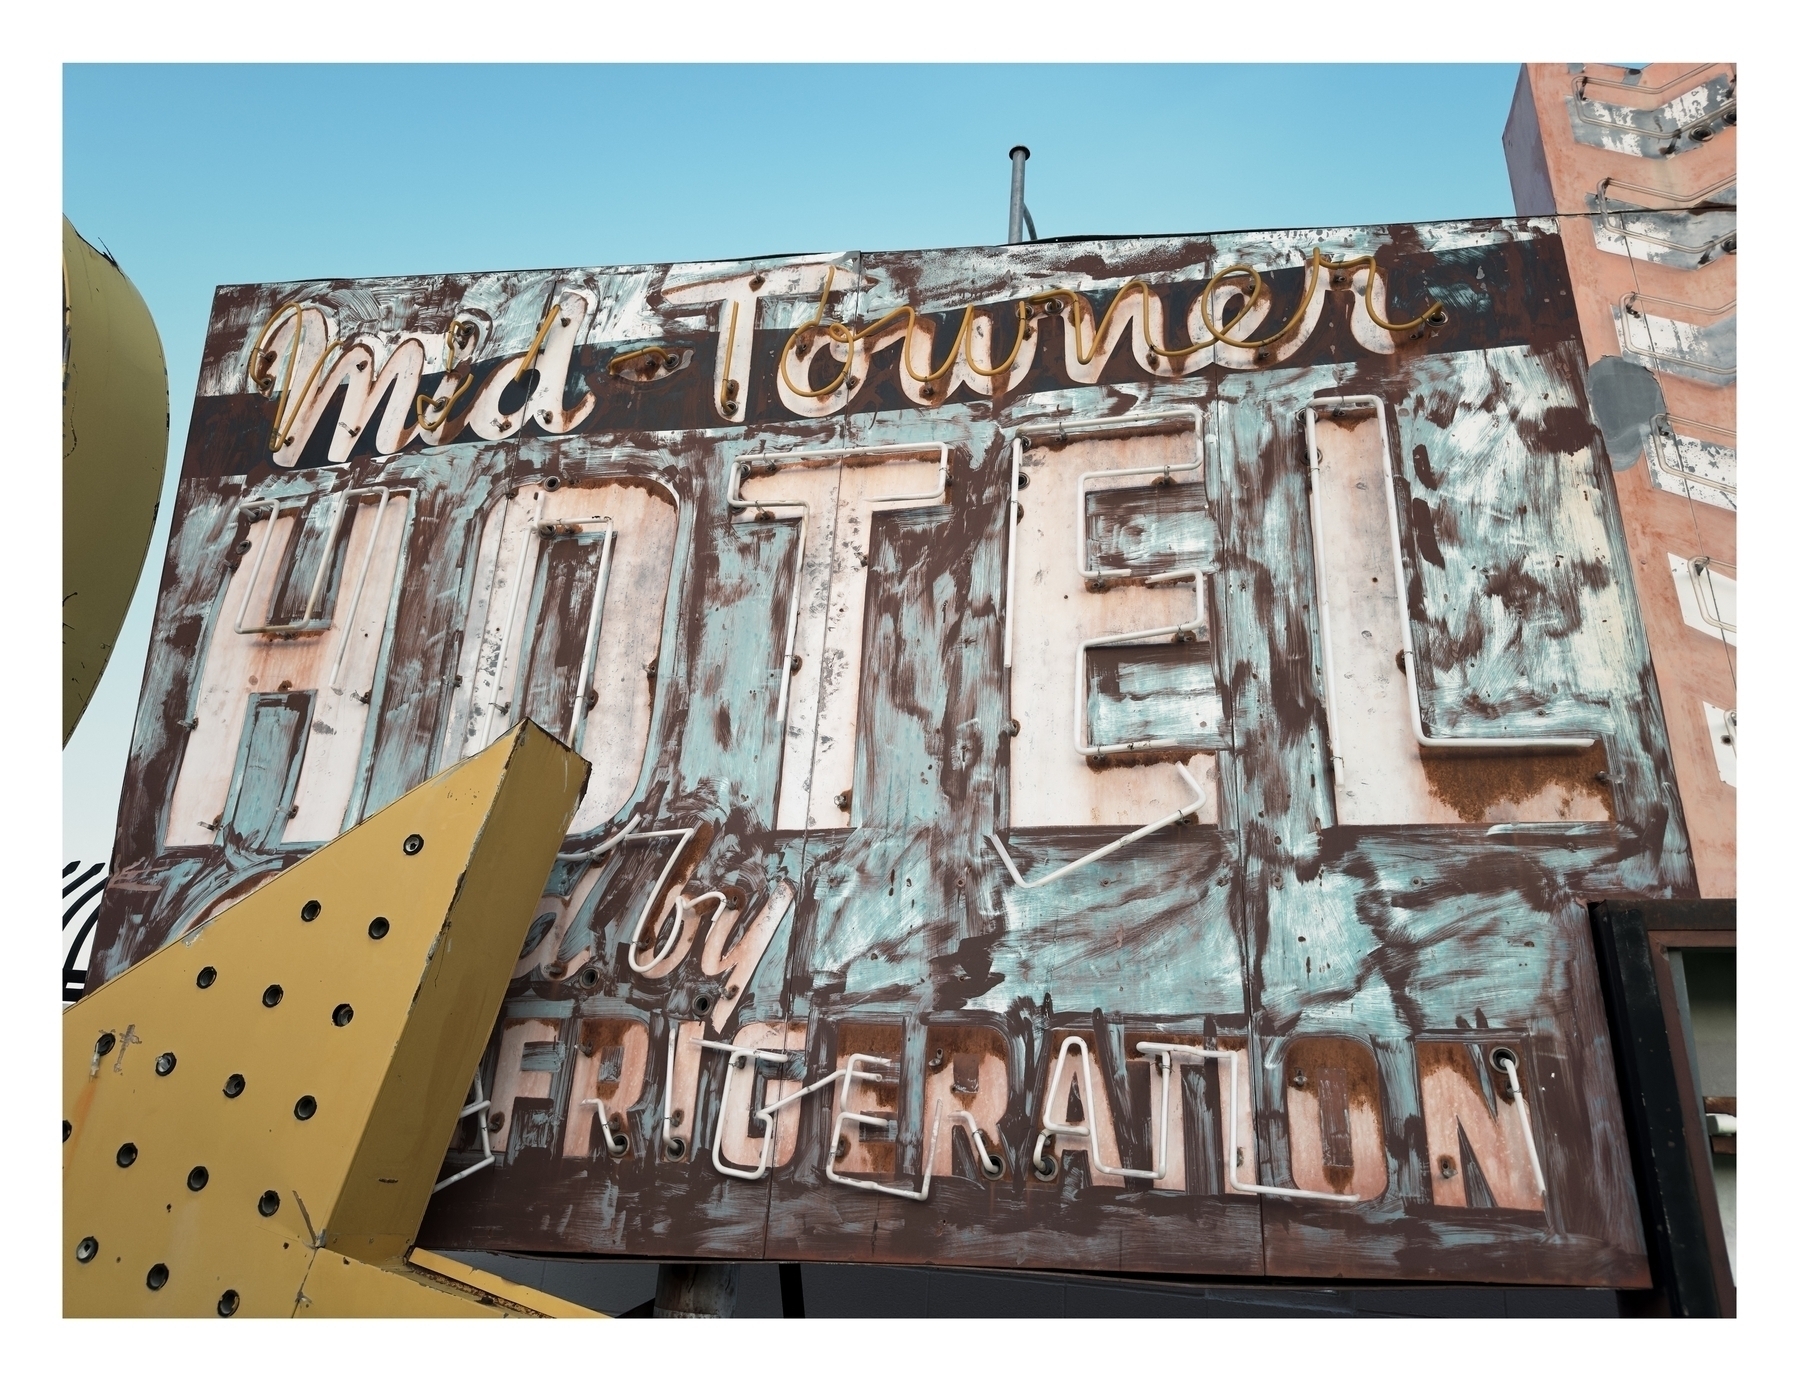 A weathered hotel sign reads “Midtown HOTEL by REFRIGERATION” with faded and rusty letters against the sky.